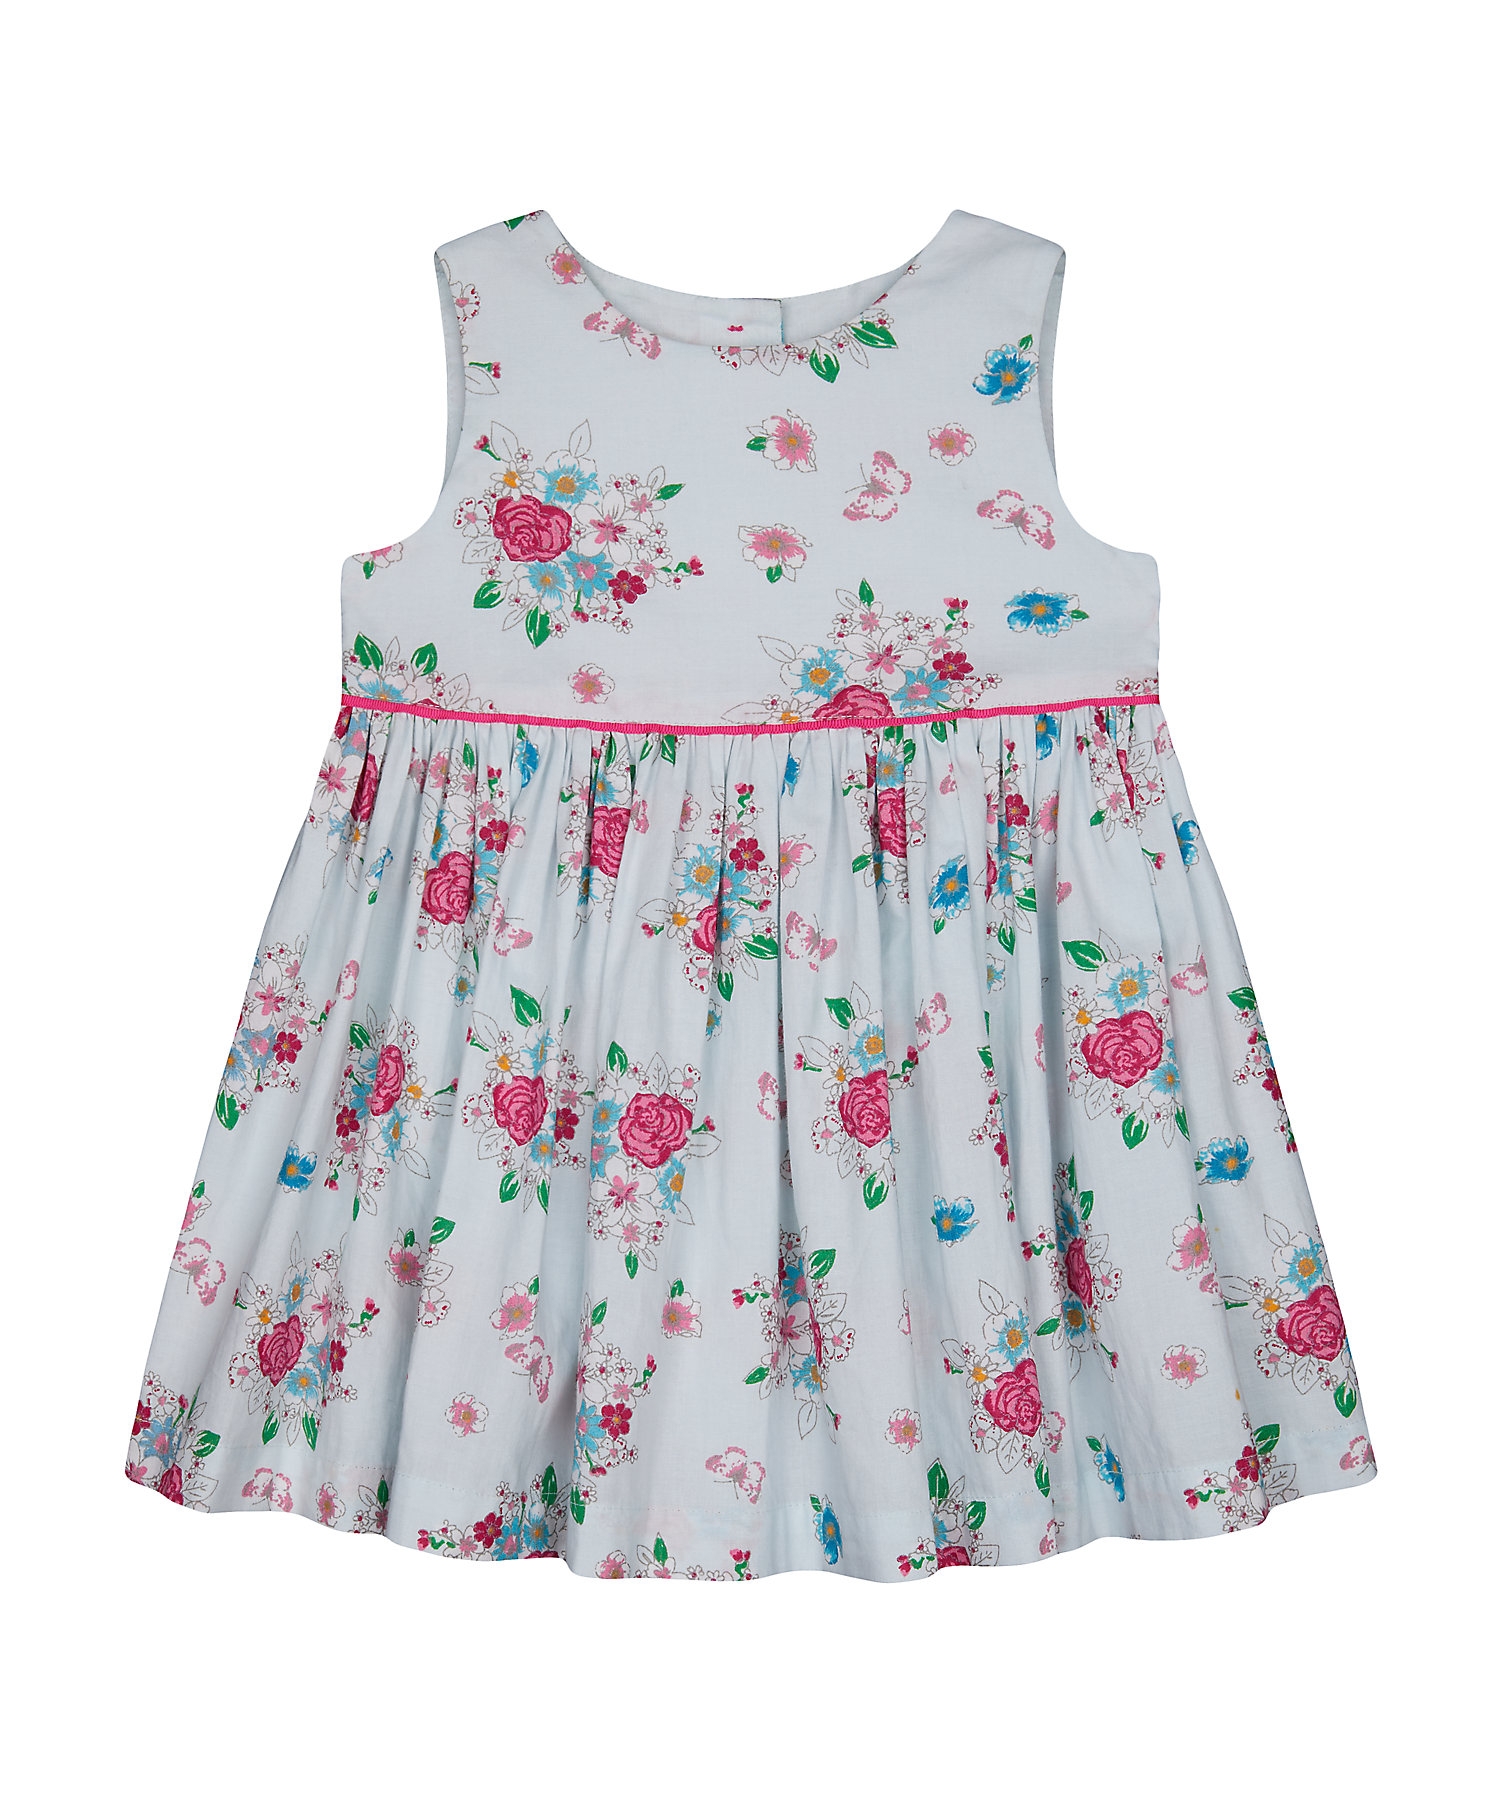 Mothercare | Turquoise Floral Dress